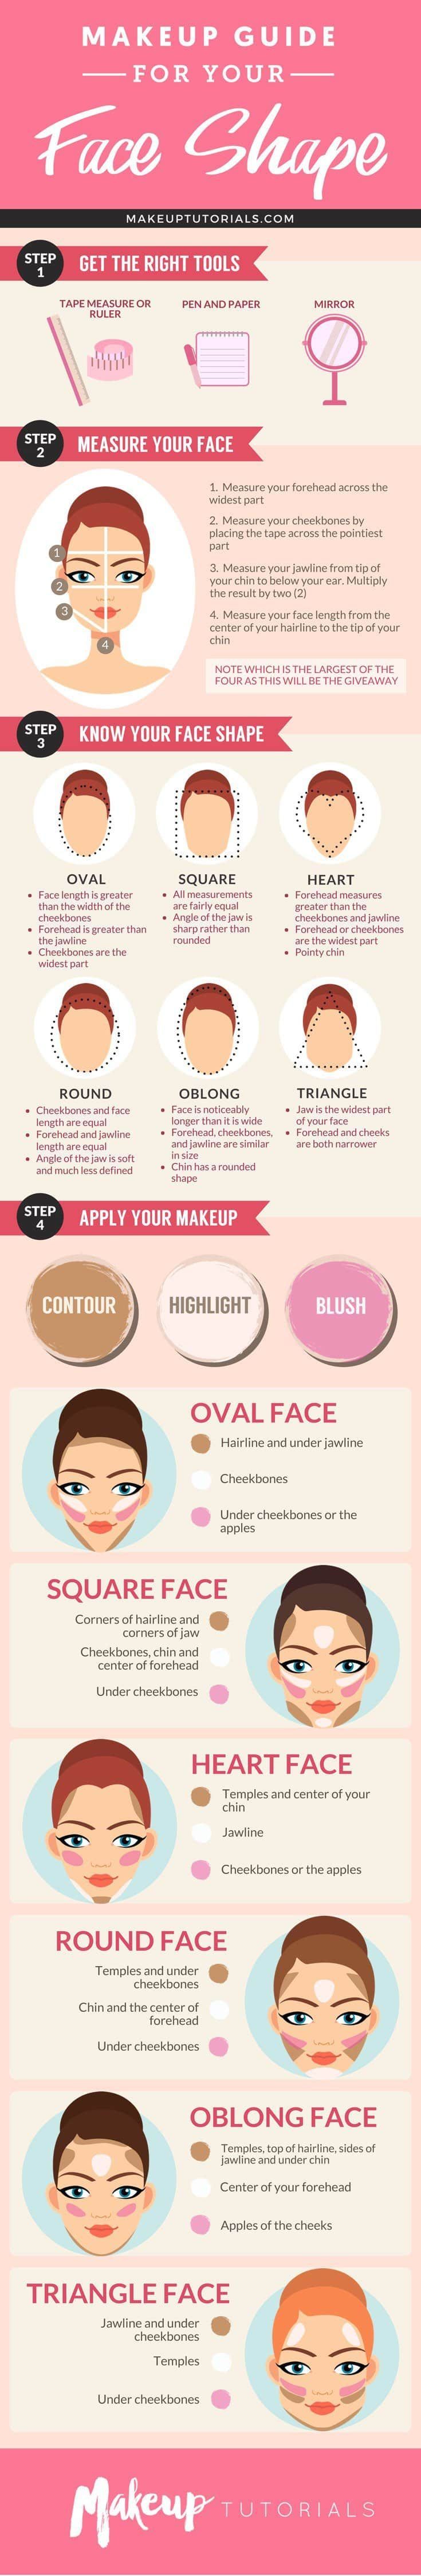 How To Contour Your Face Depending On Your Face Shape